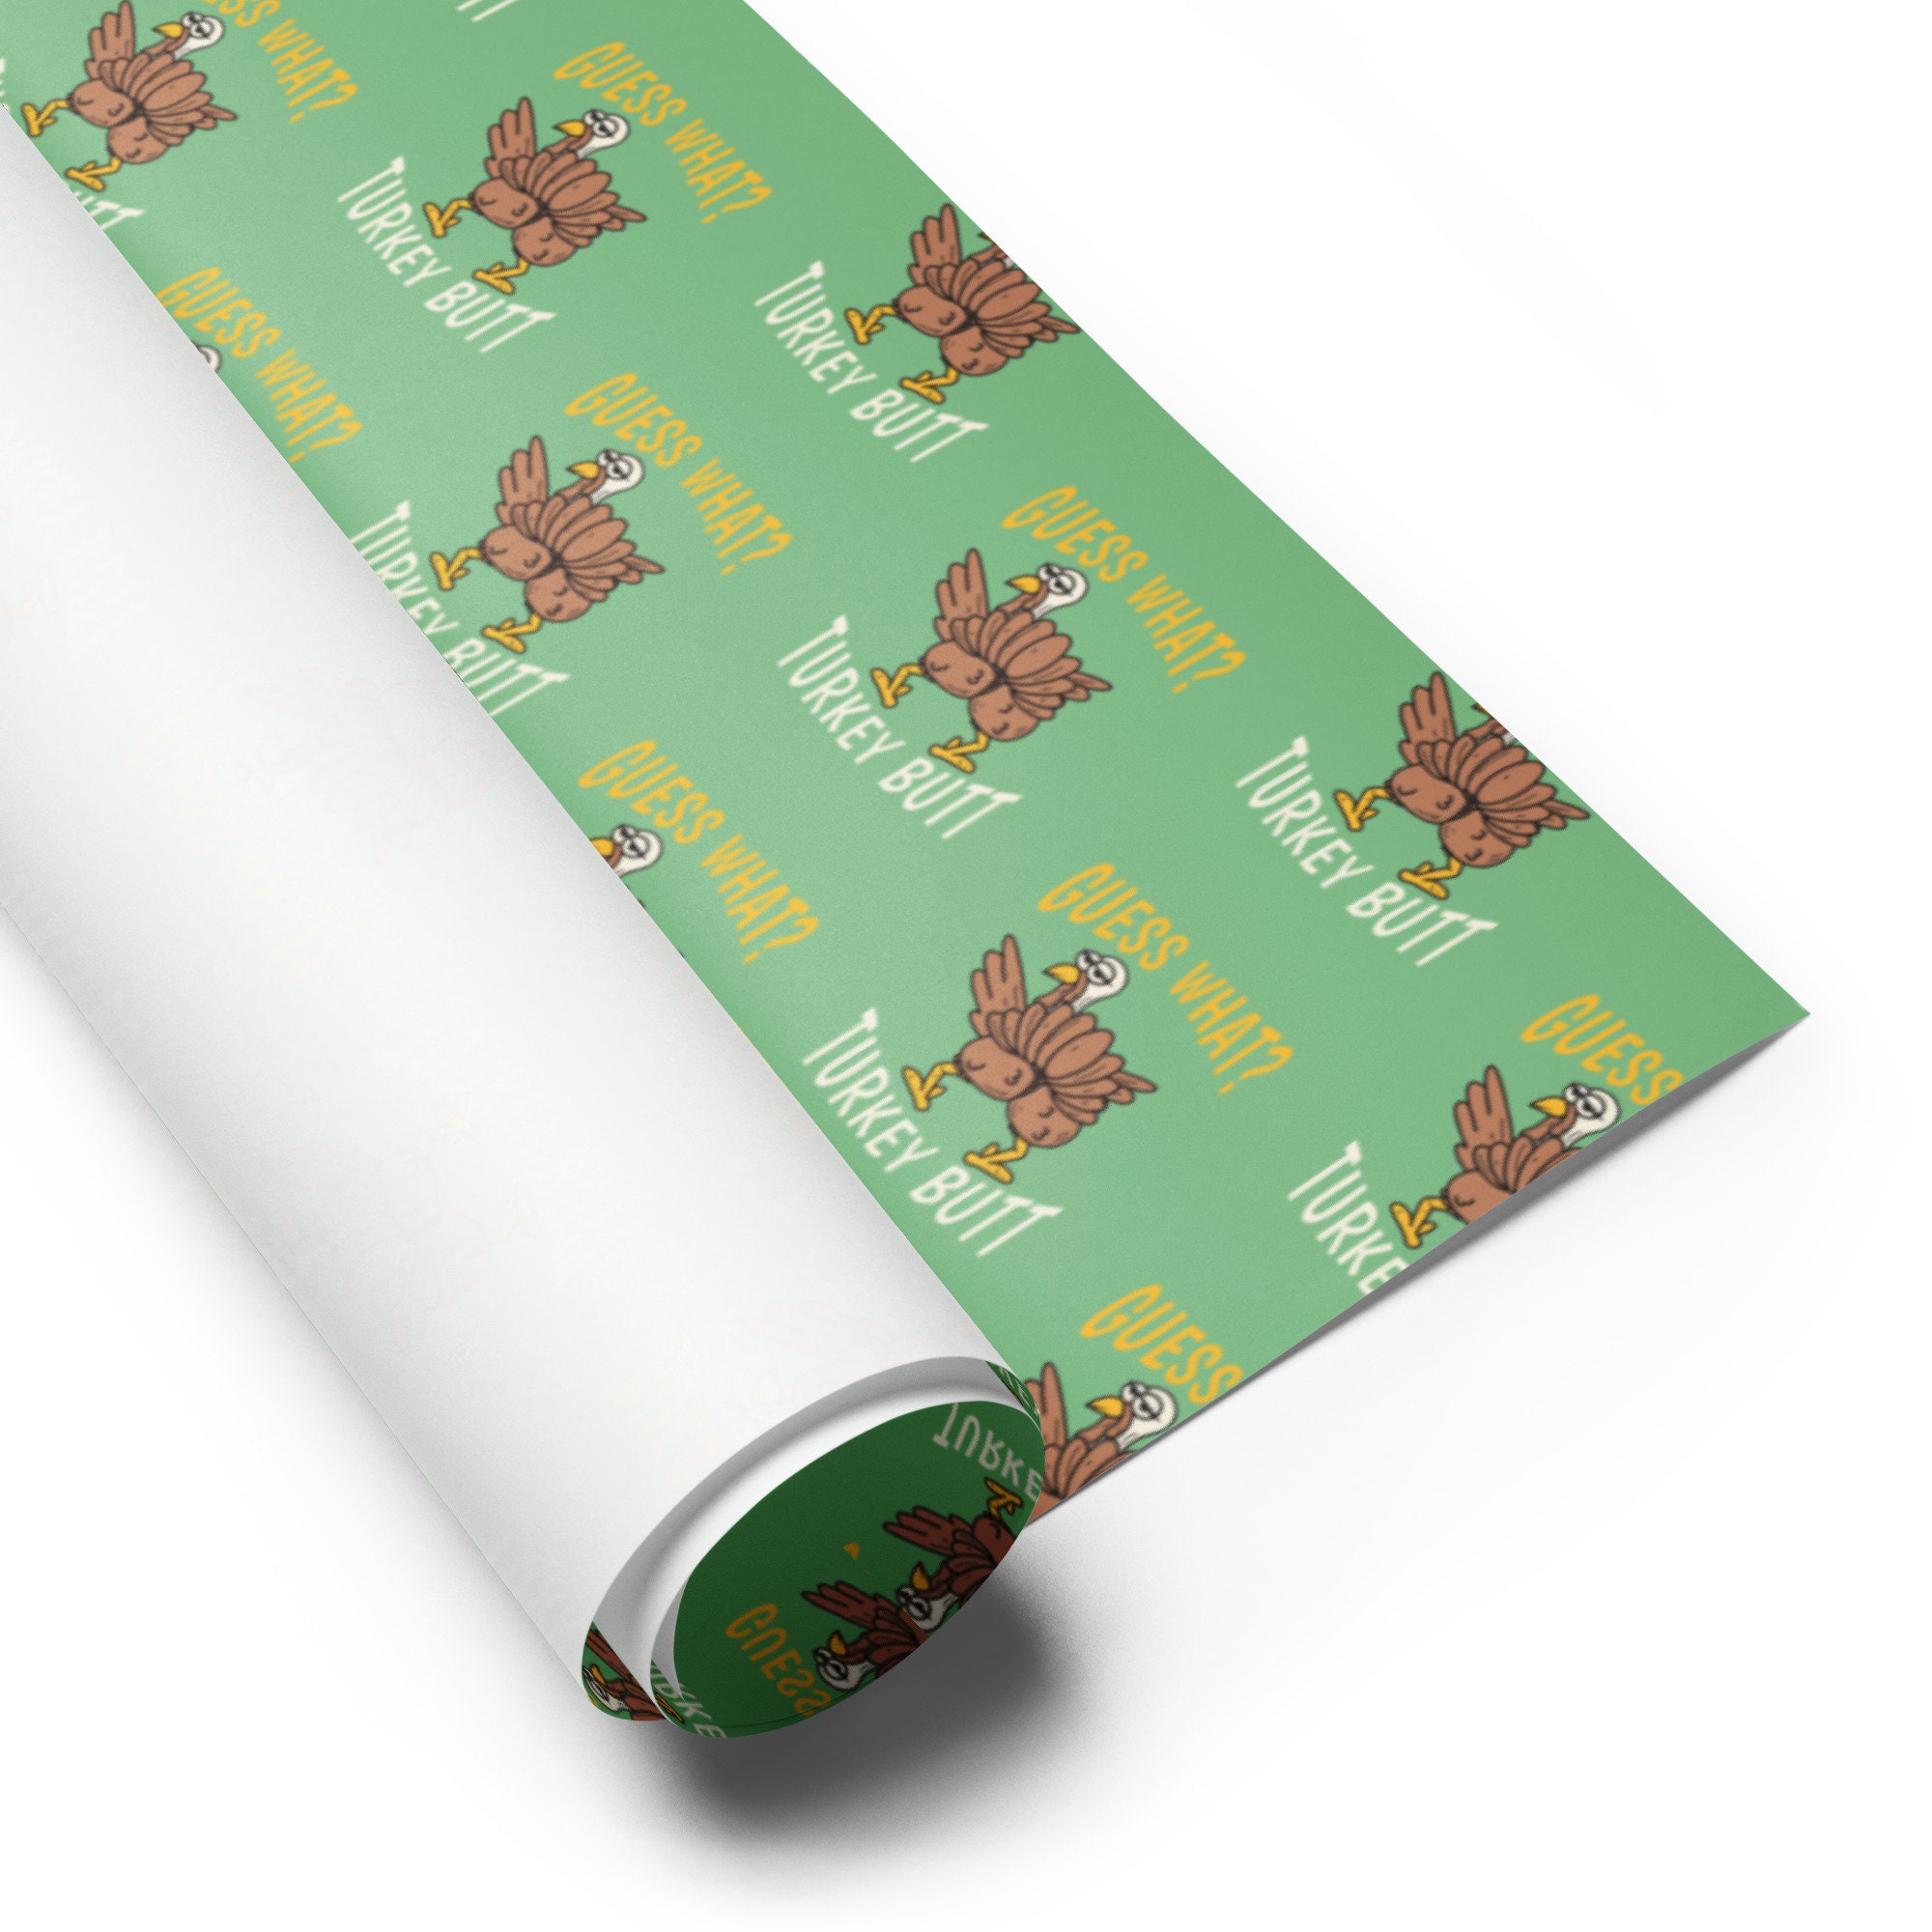 Humorous Turkey Butt Gift Wrapping Paper Green Matte Finish 